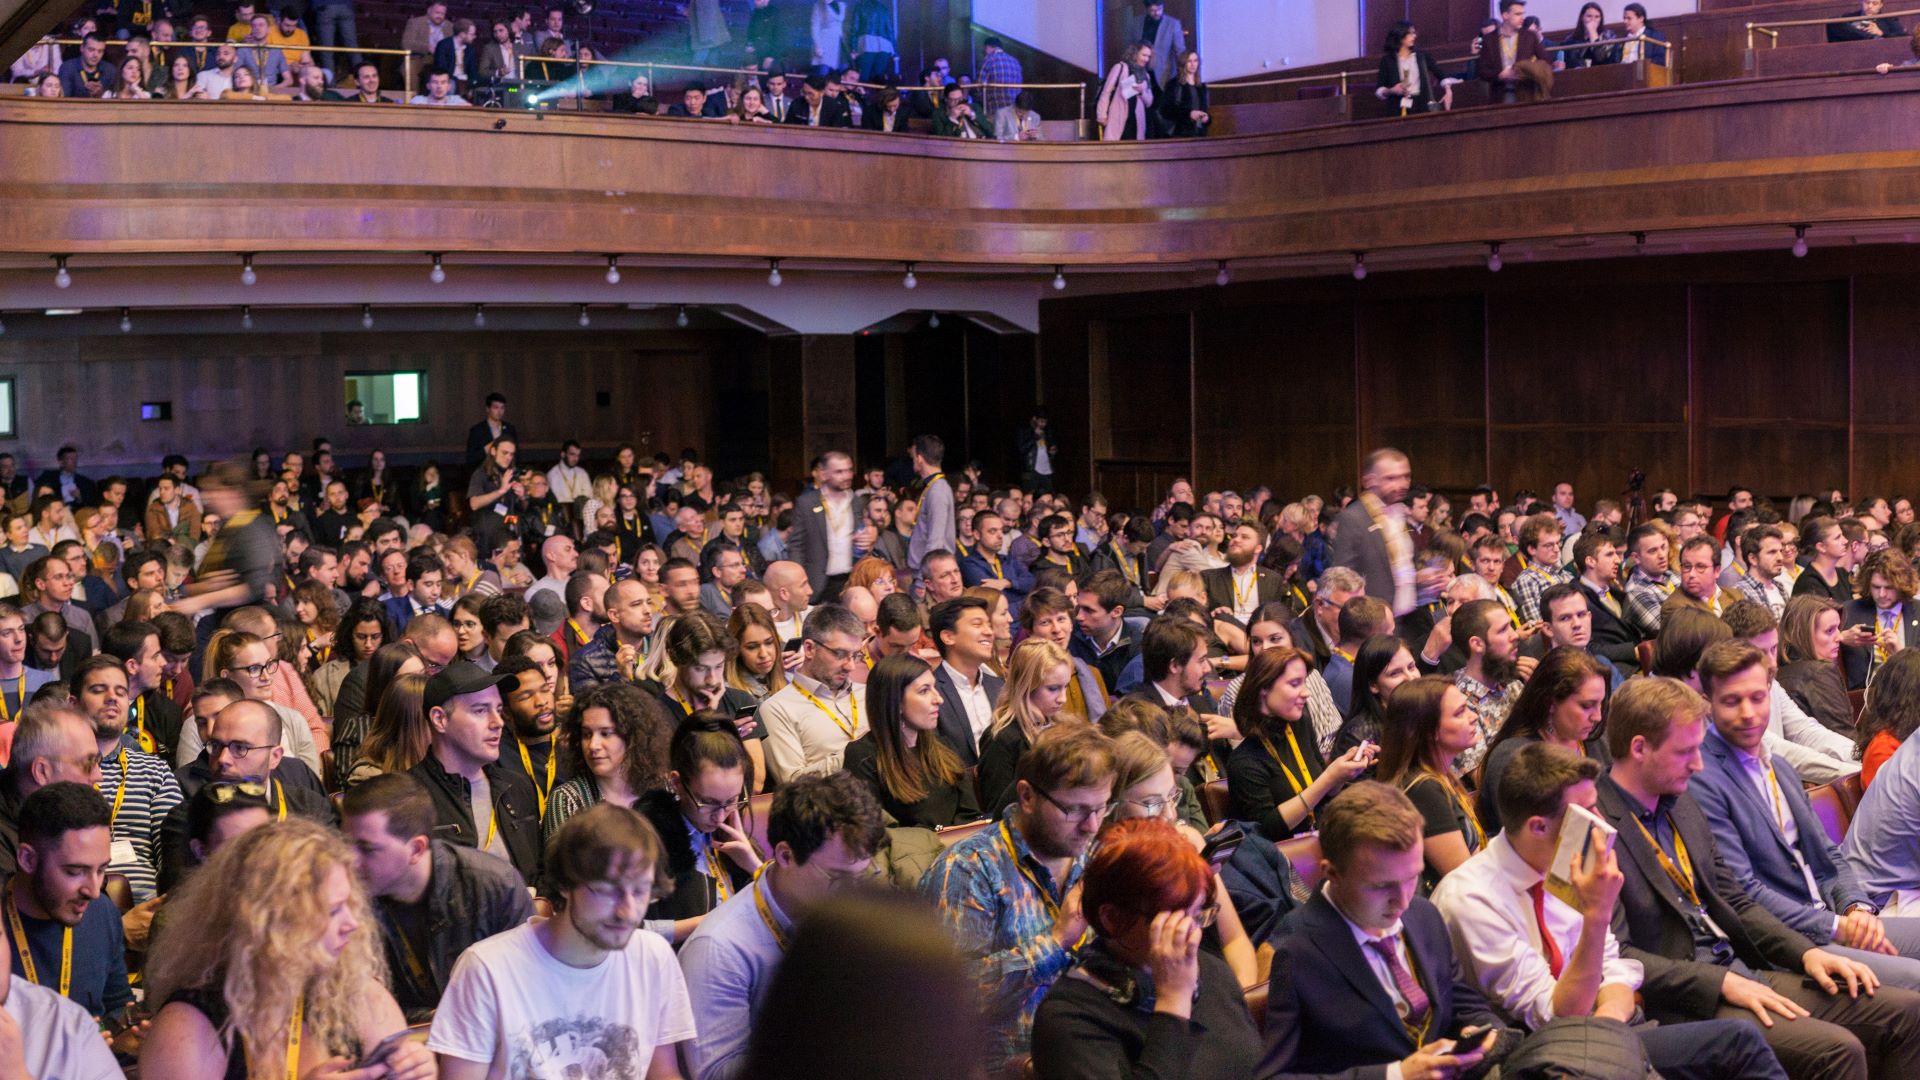 LibertyCon Europe, held in Prague on April 23-24, 2022, provides an excellent networking opportunity for all liberty-minded students and alumni.